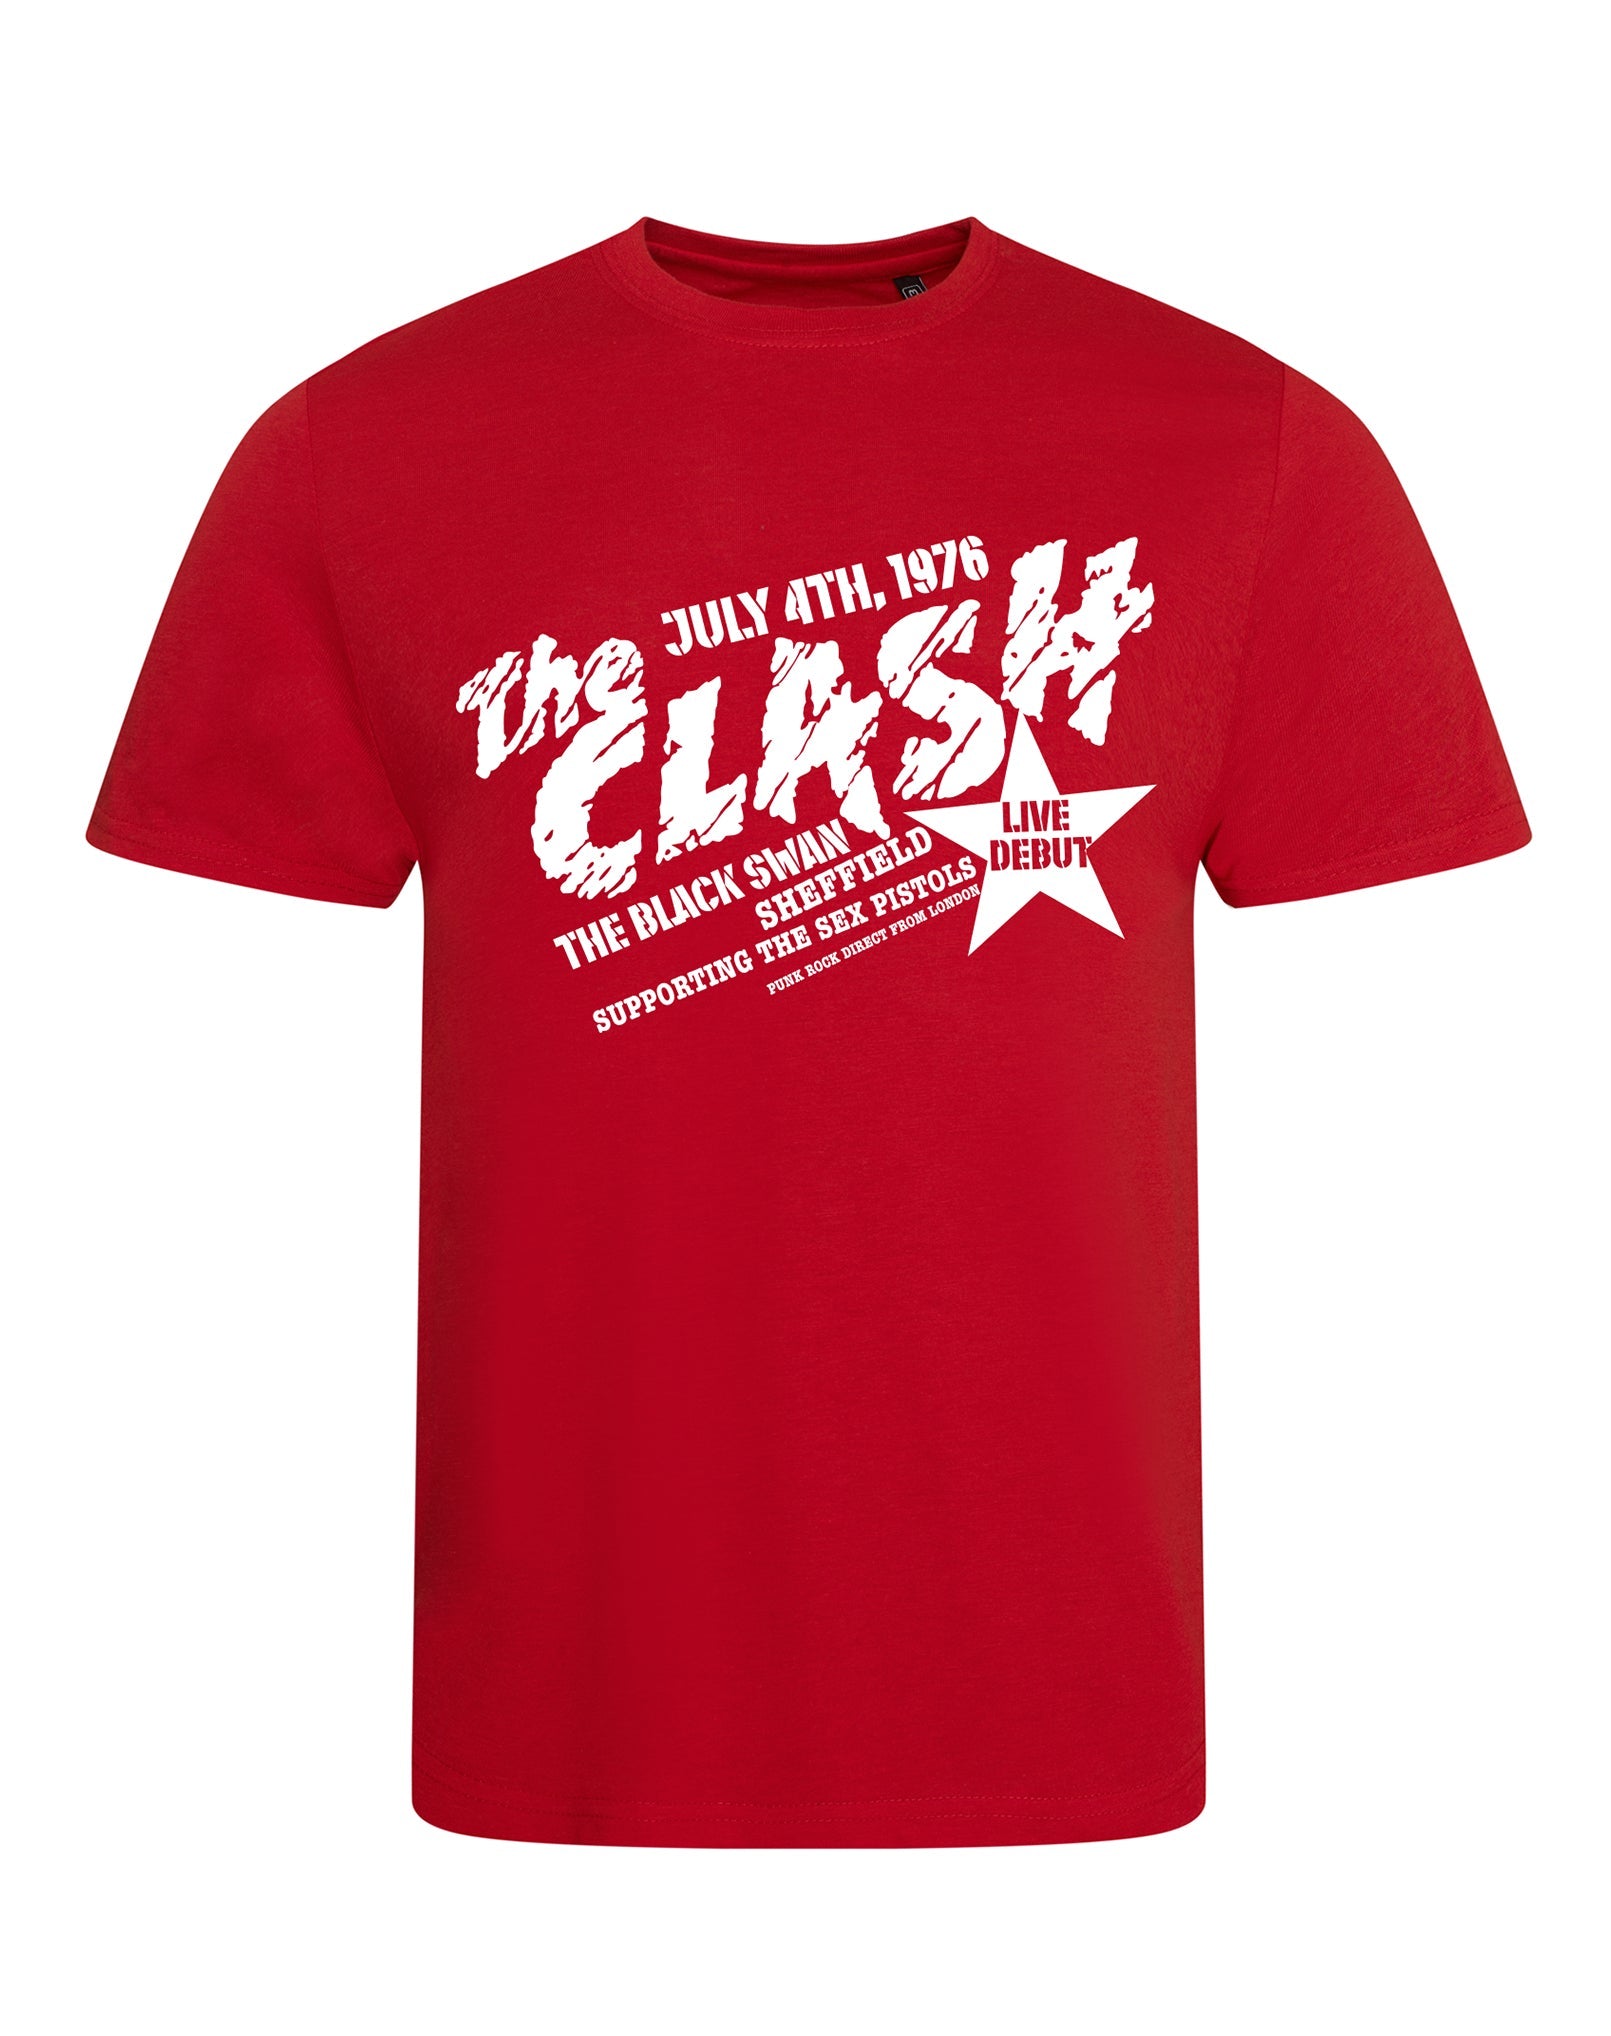 The Clash at the Black Swan unisex fit T-shirt - various colours - Dirty Stop Outs